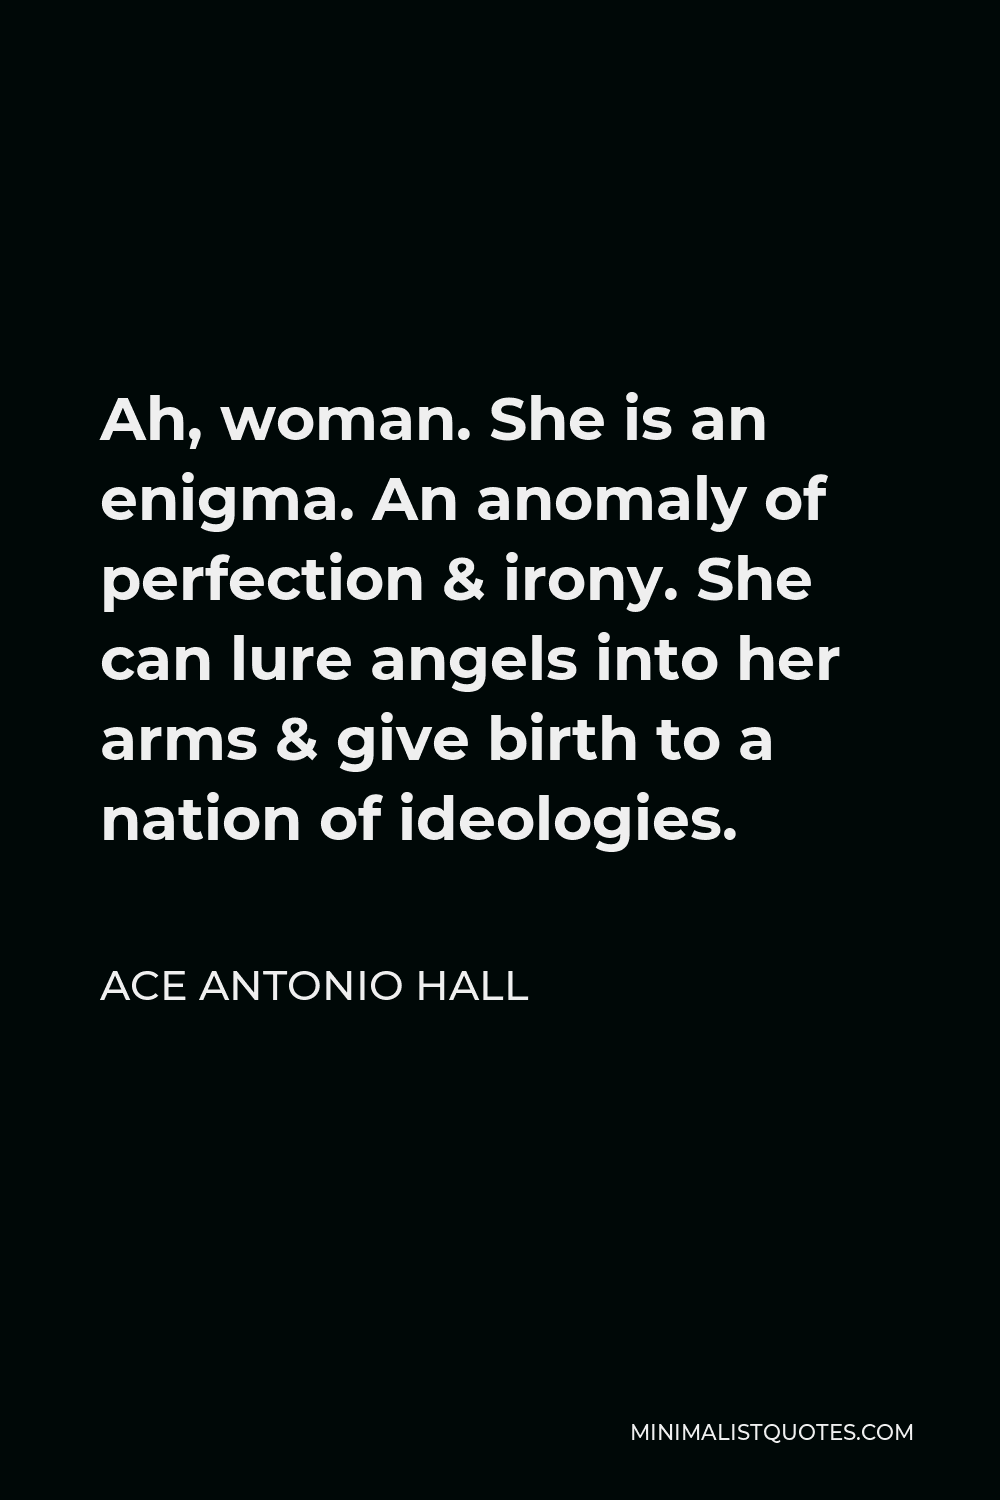 Ace Antonio Hall Quote - Ah, woman. She is an enigma. An anomaly of perfection & irony. She can lure angels into her arms & give birth to a nation of ideologies.